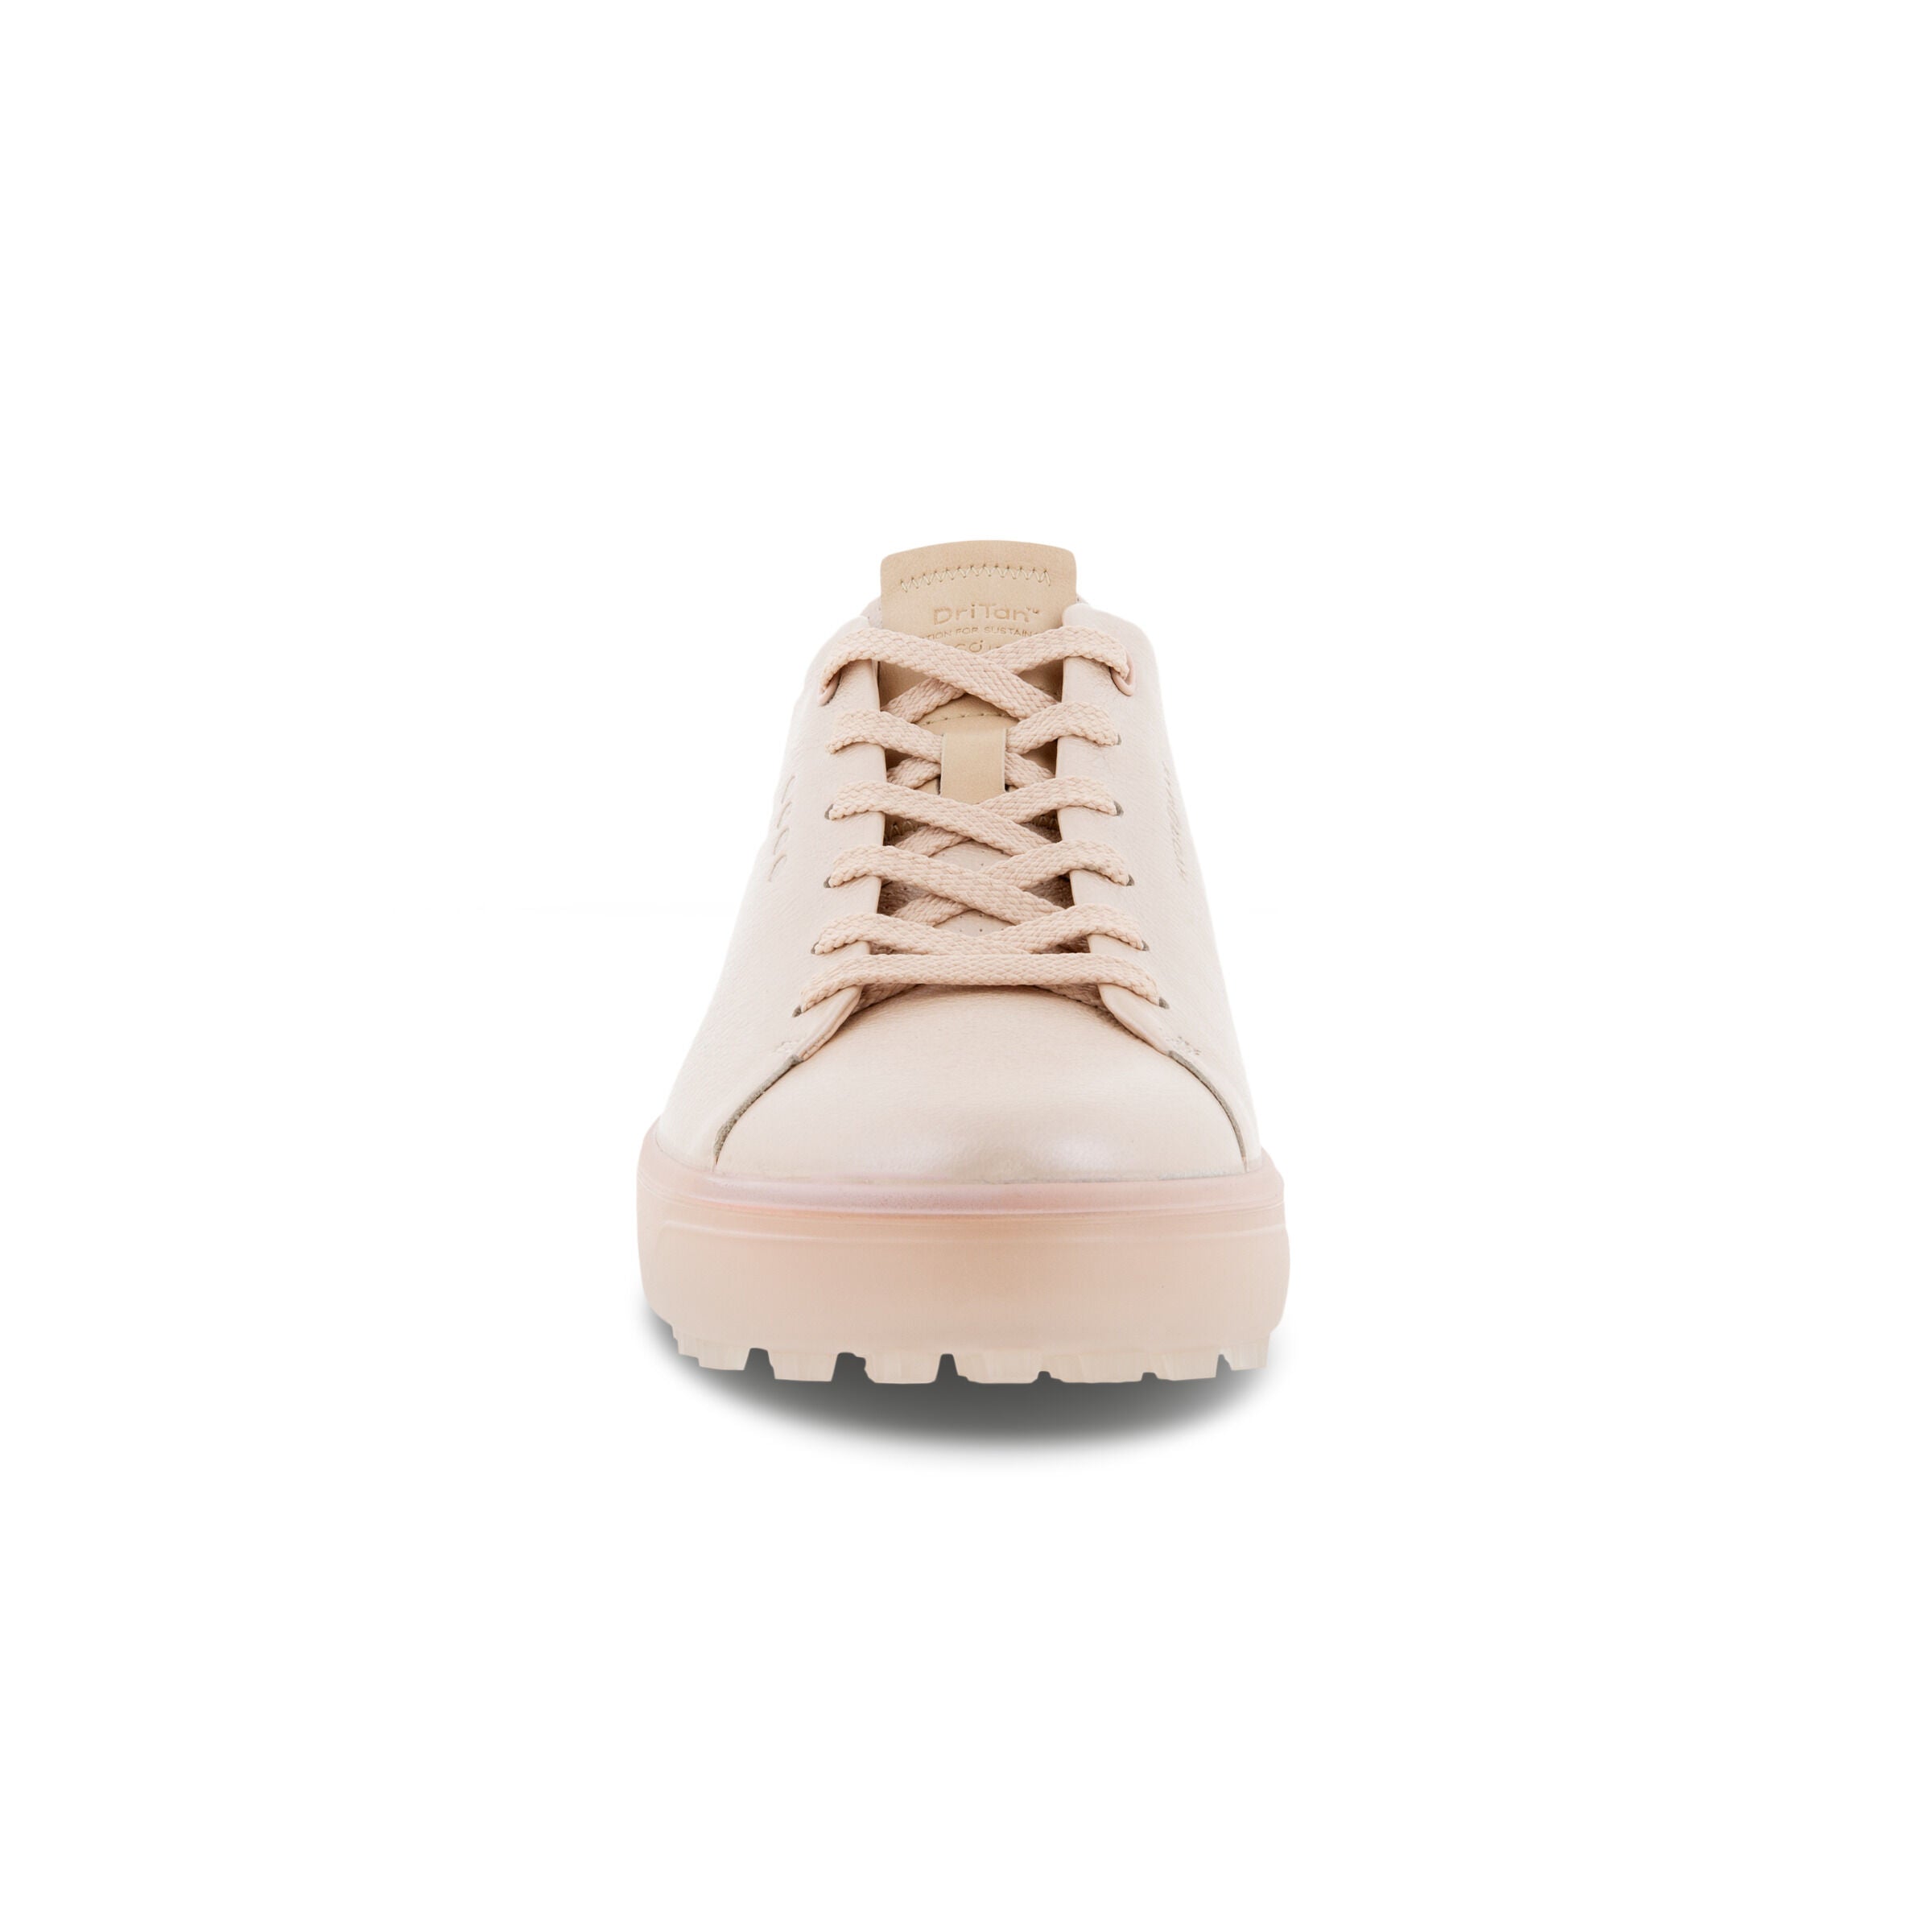 ECCO WOMEN'S GOLF TRAY LACED SHOES